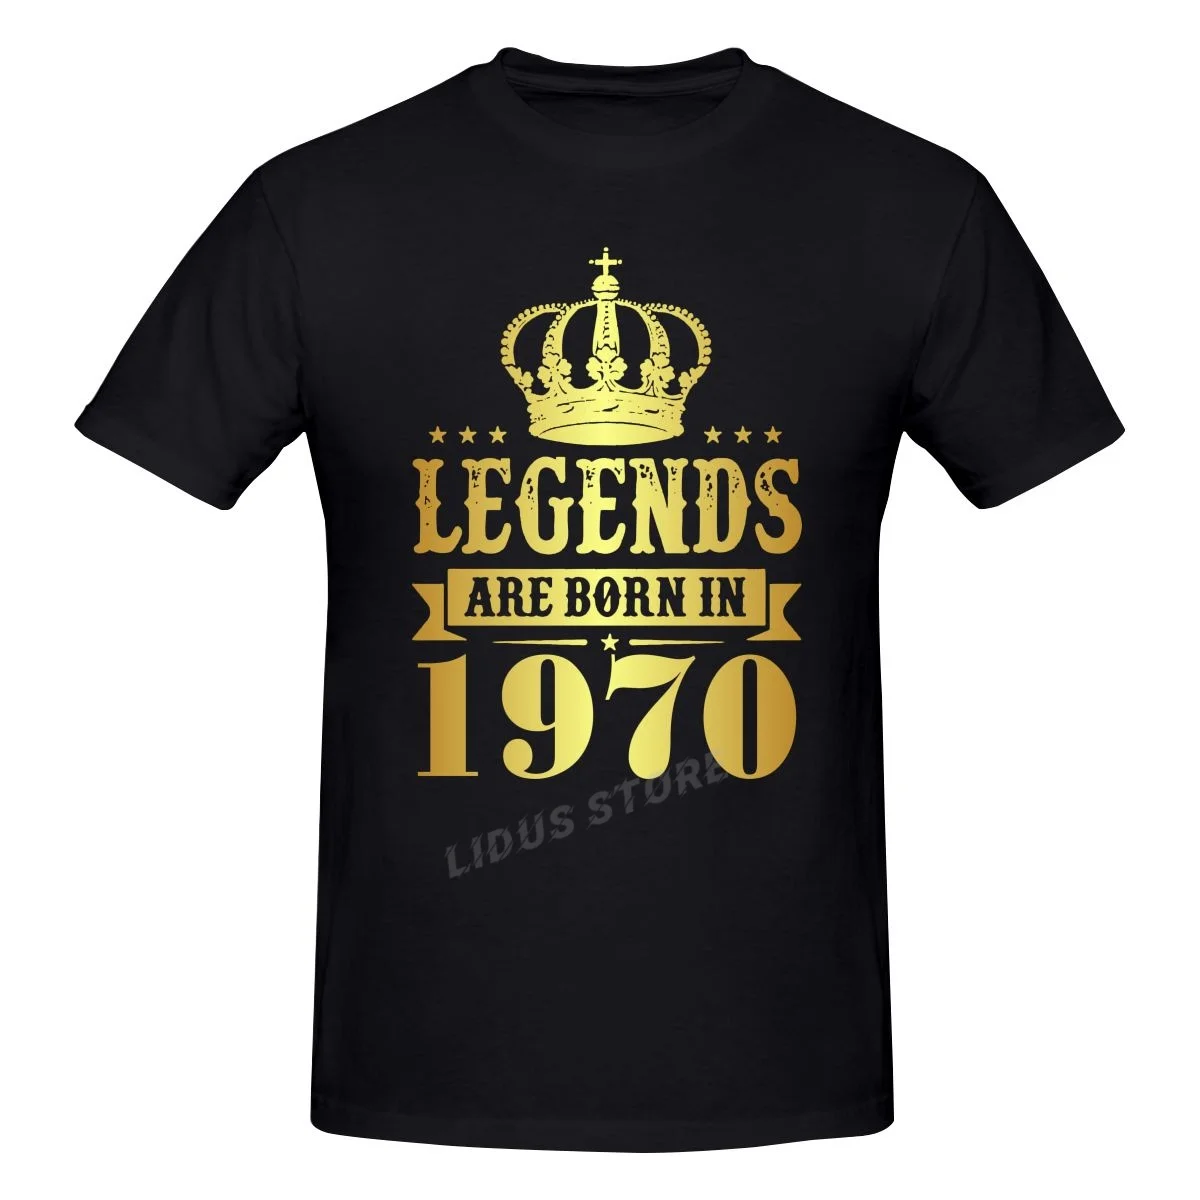 Legends Are Born In 1970 52 Years For 52th Birthday Gift T shirt Harajuku Clothing T-shirt 100% Cotton Graphics Tshirt Tee Tops